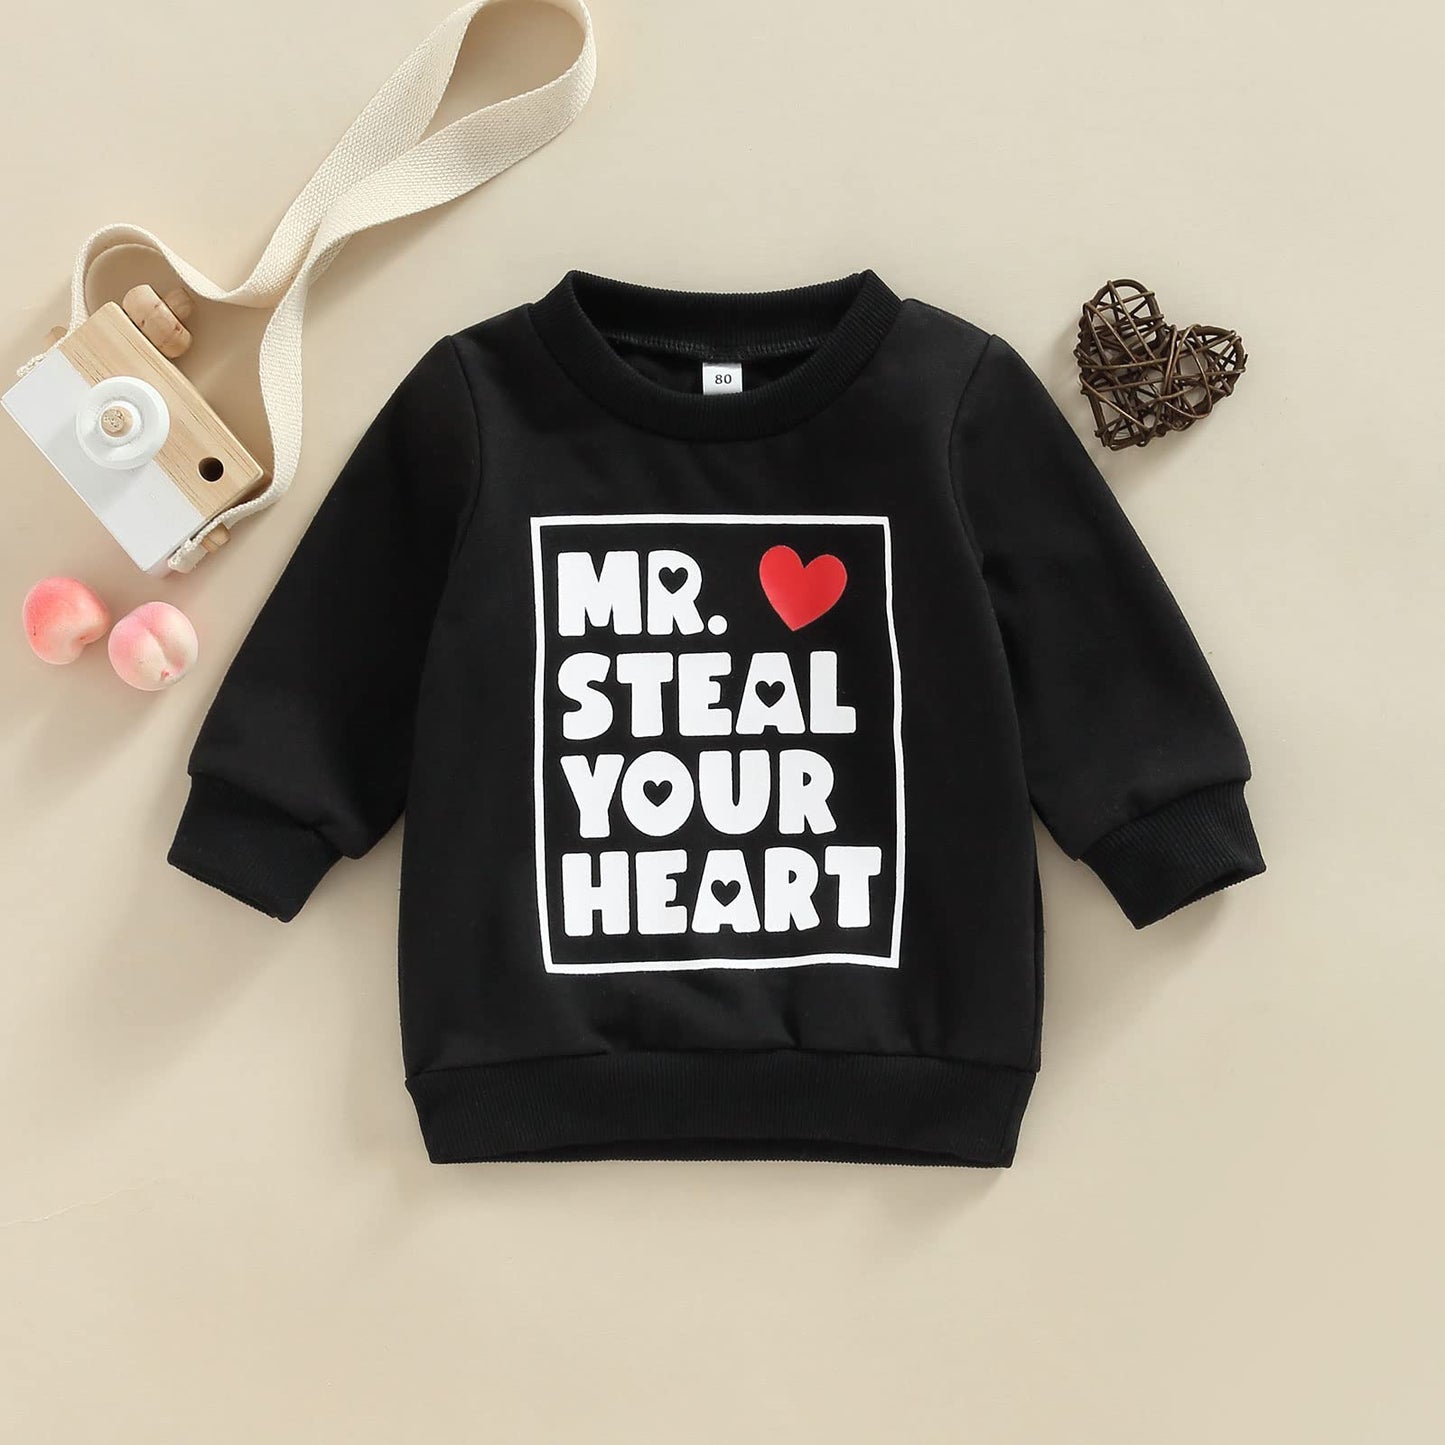 Eadrioss Toddler Baby Boys  Valentine's Day Outfit MR. Steal Your Heart Sweatshirt Spring Valentines Clothes Top  0-6 month